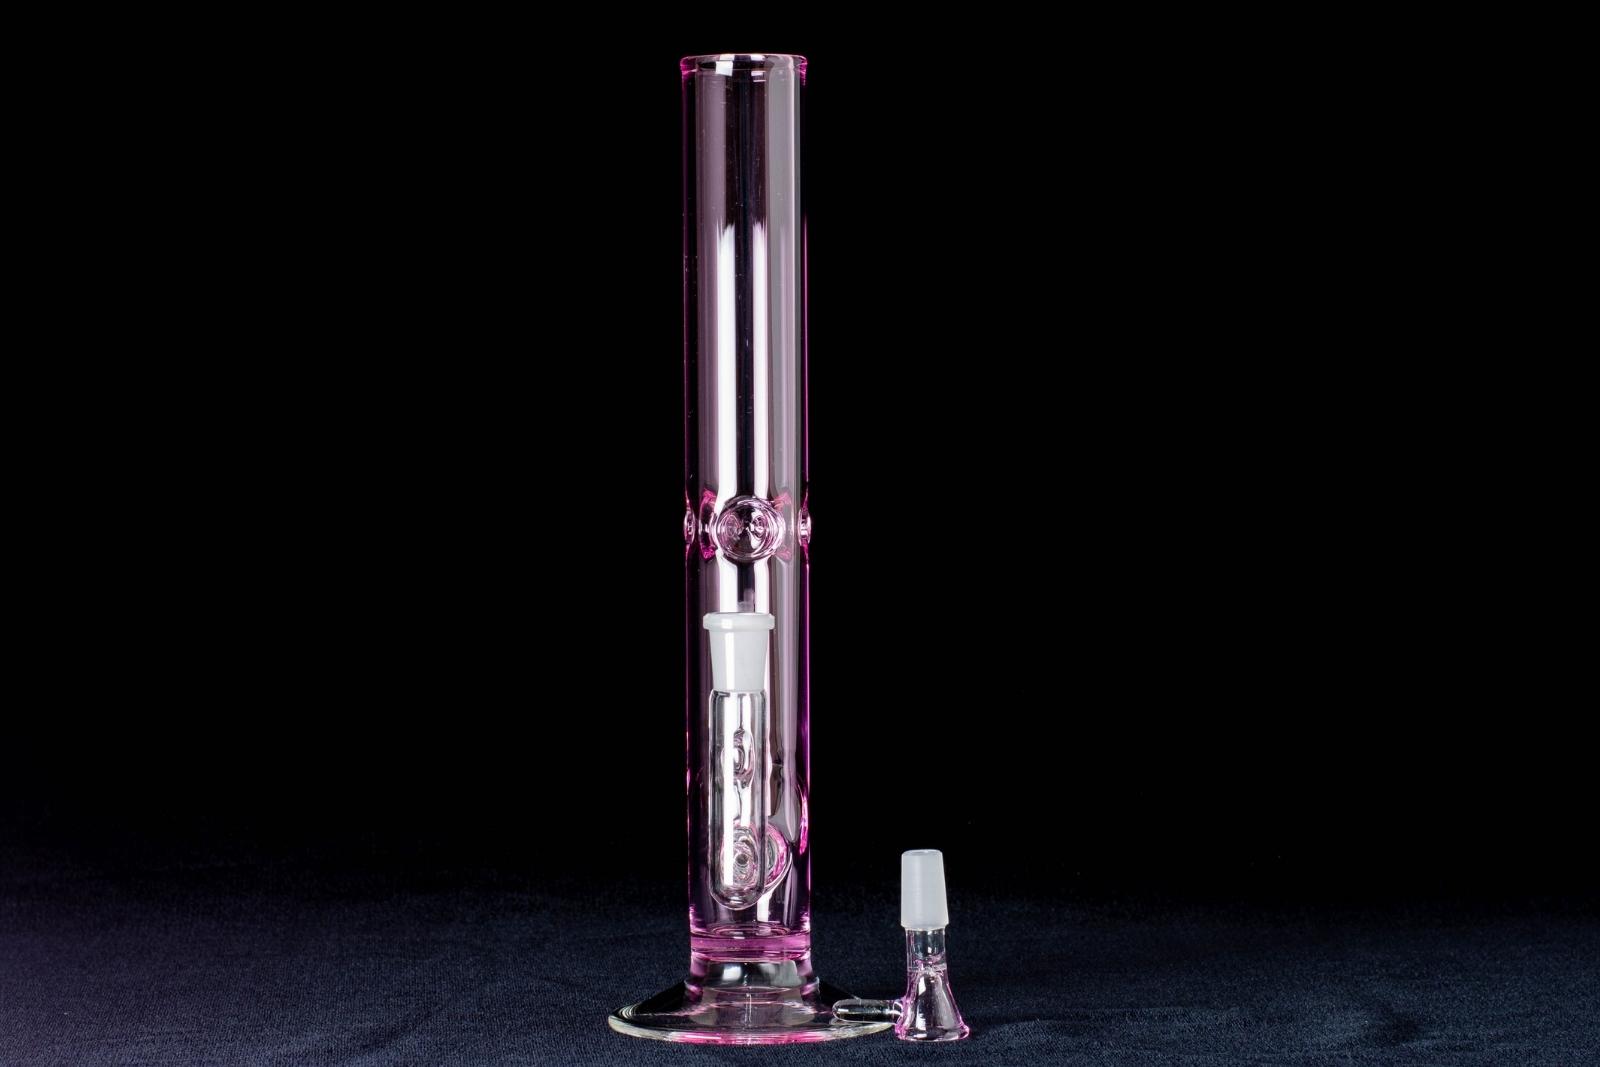 A pink, 12-inch straight tube, made by Jack Glass Co., next to its slide, on a black background